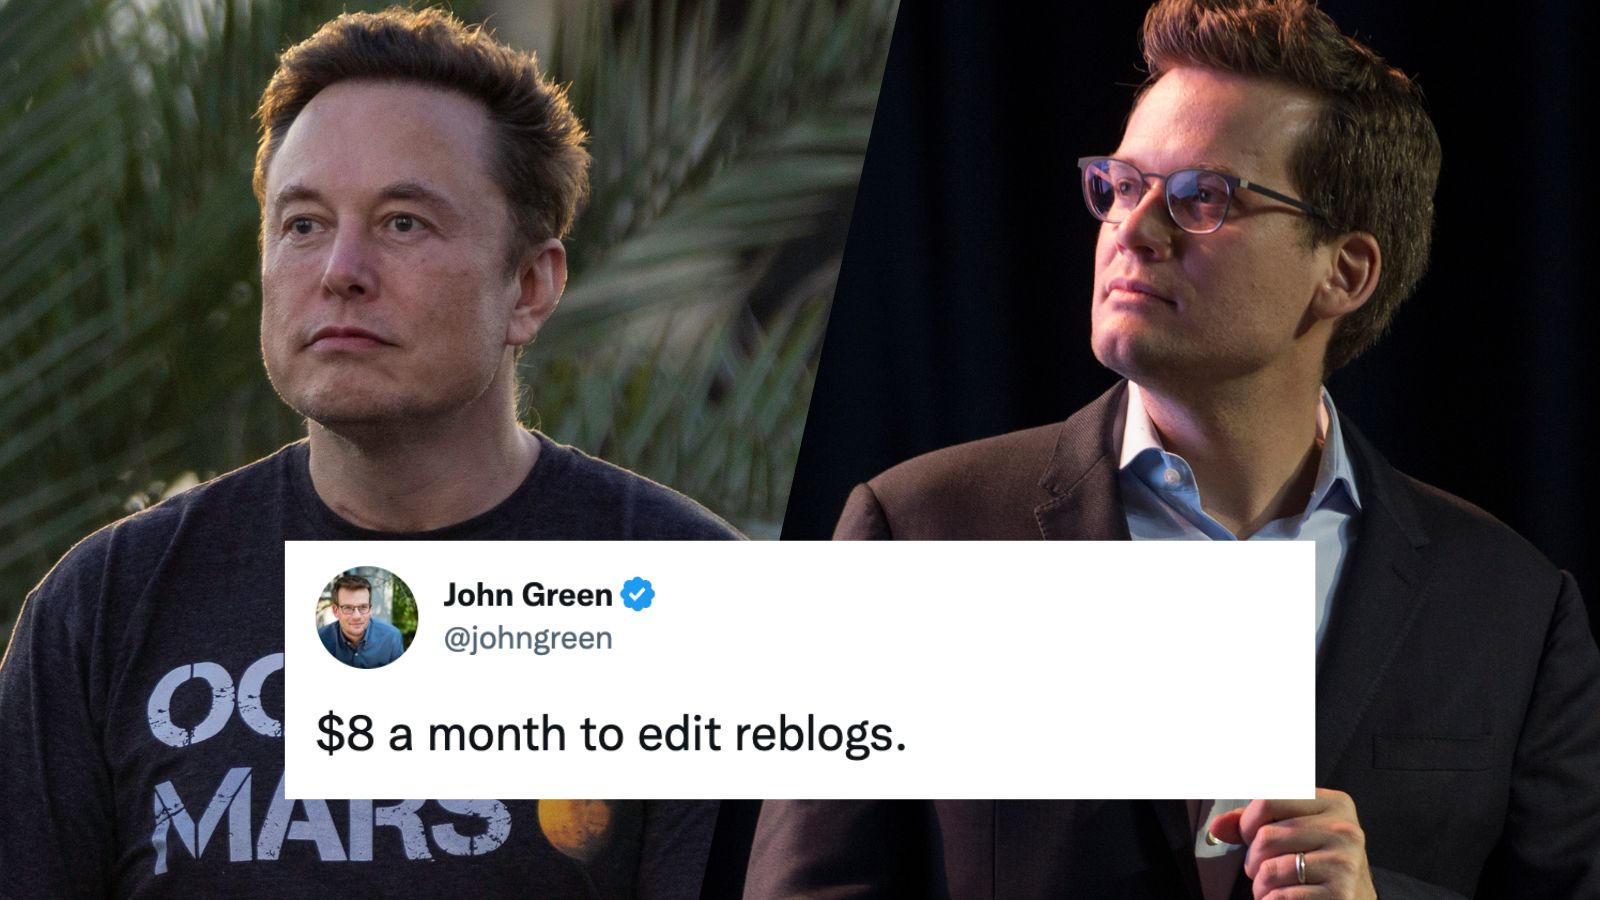 John Green relives his infamous Tumblr drama of 2014 to roast Elon Musk